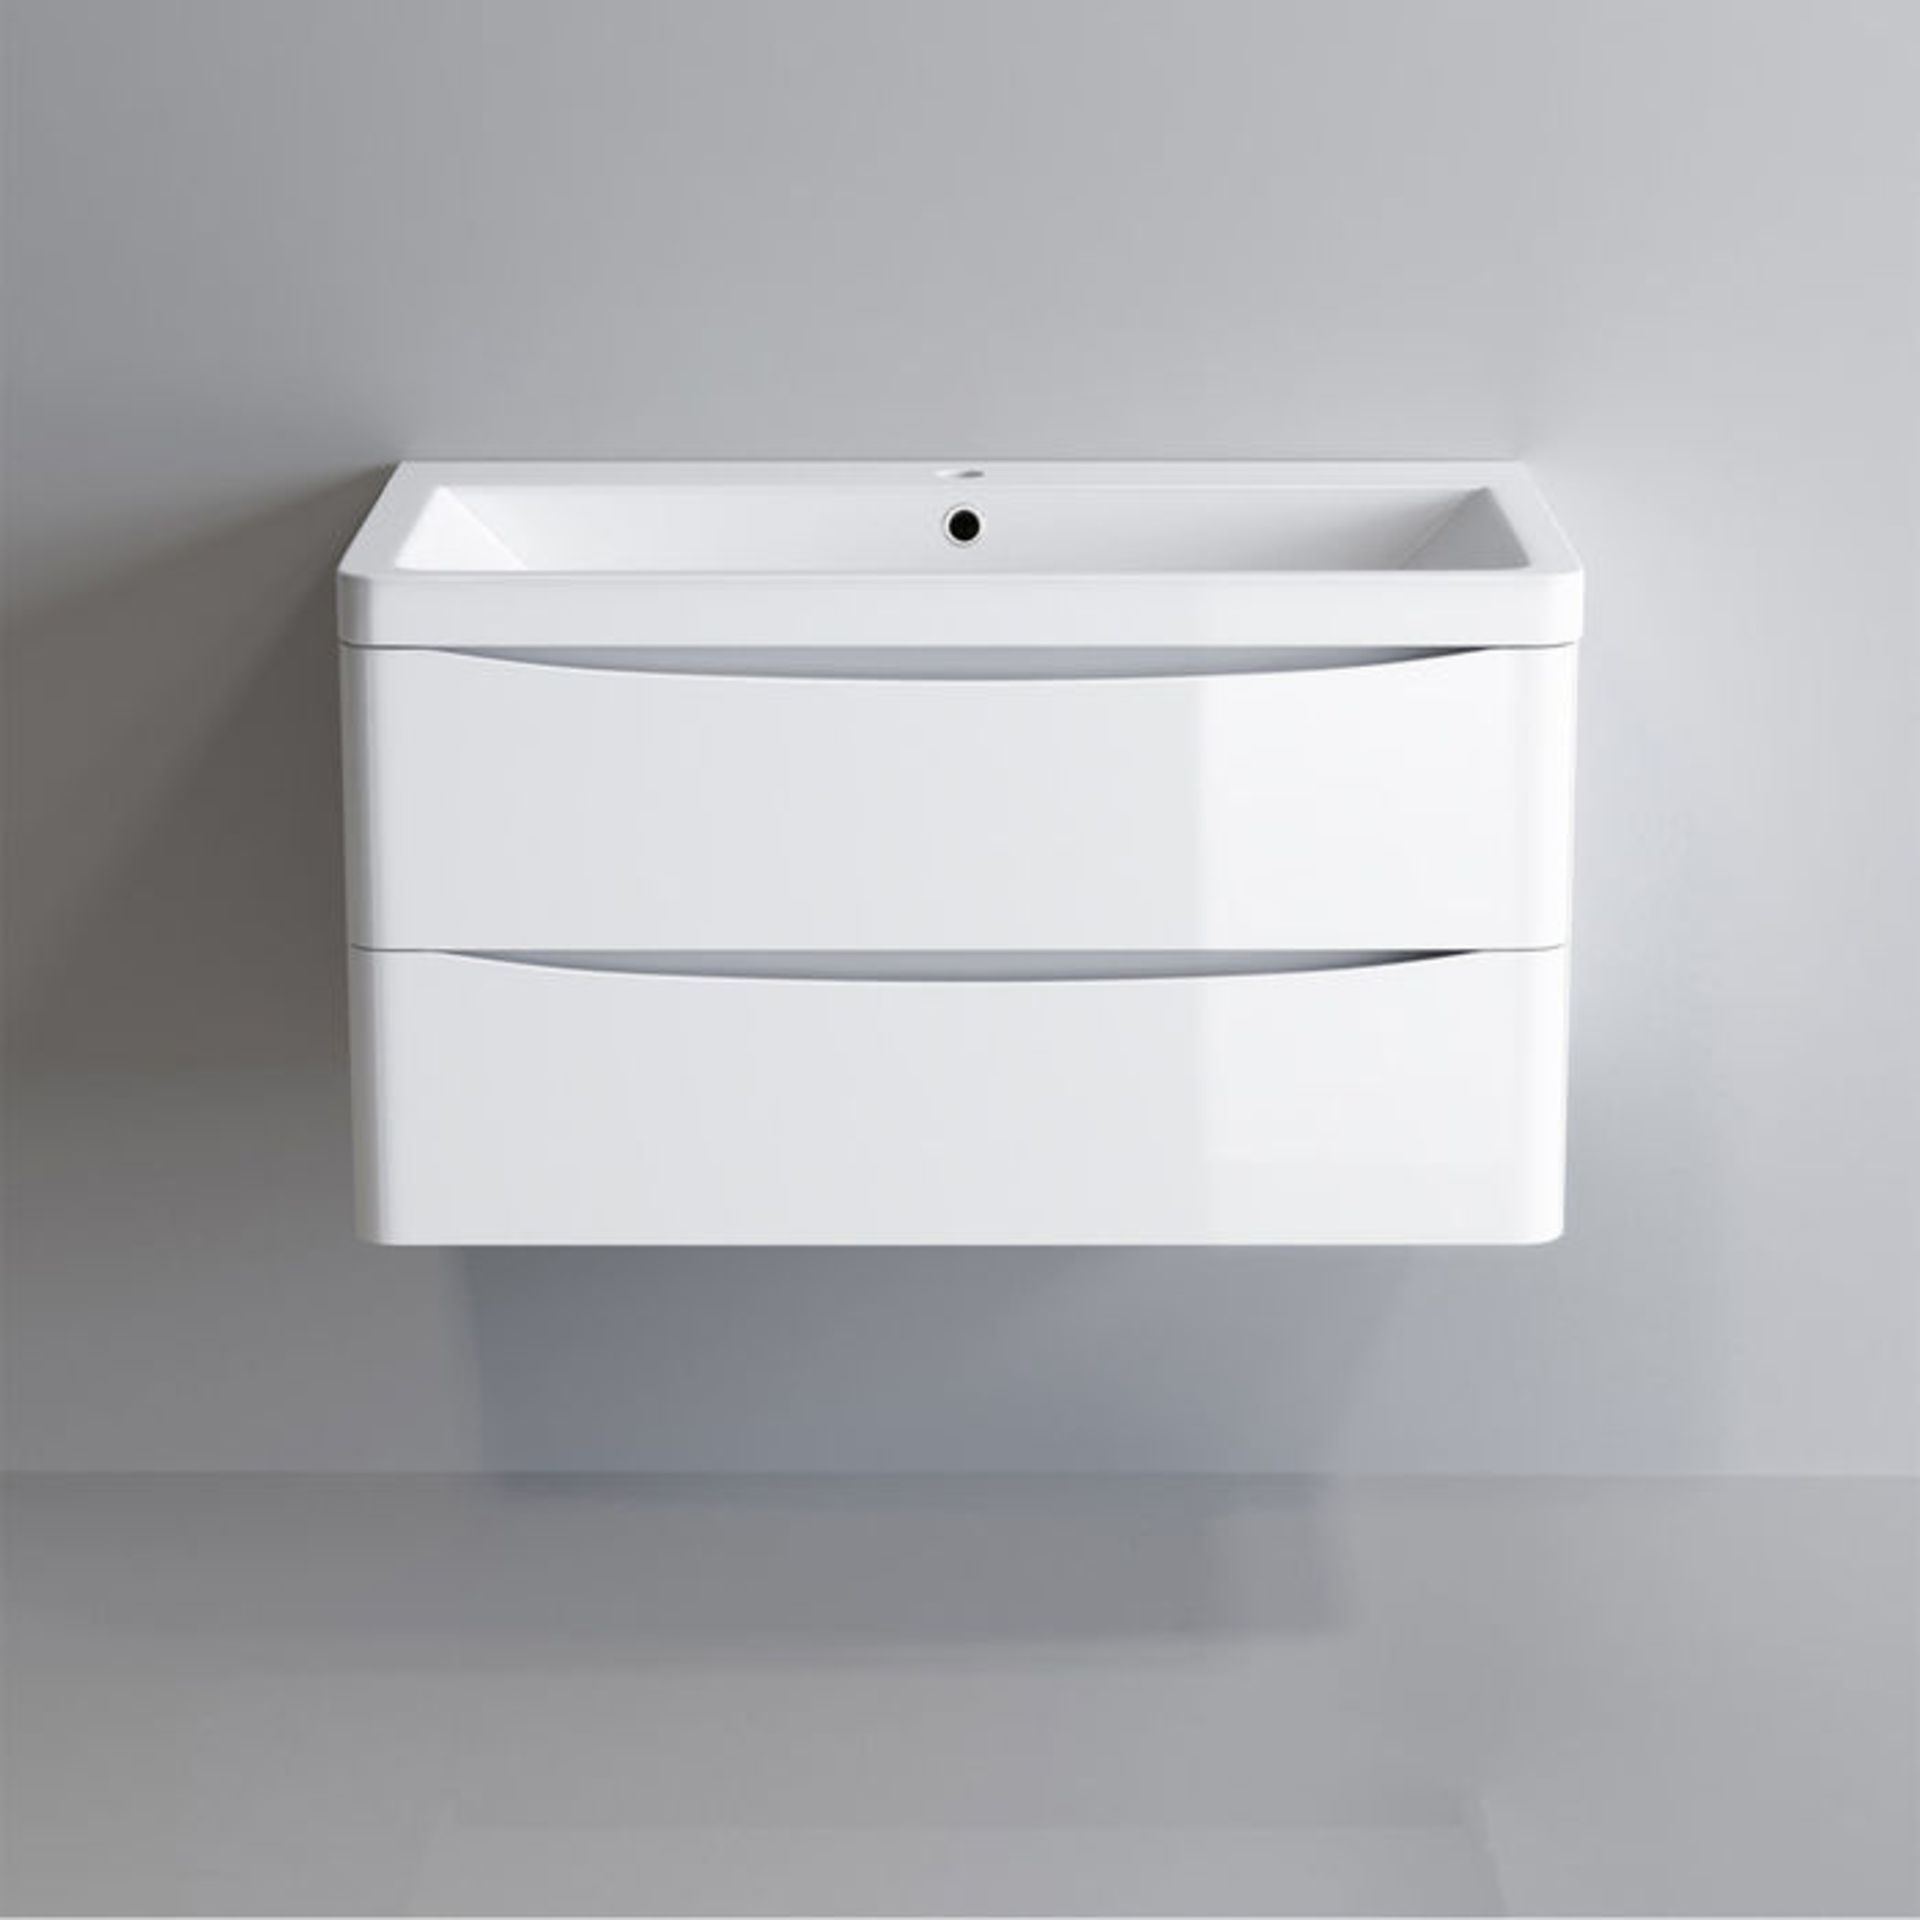 (PT77) 800mm Austin II Gloss White Built In Basin Drawer Unit - Wall Hung. RRP £499.99. Comes - Image 4 of 4